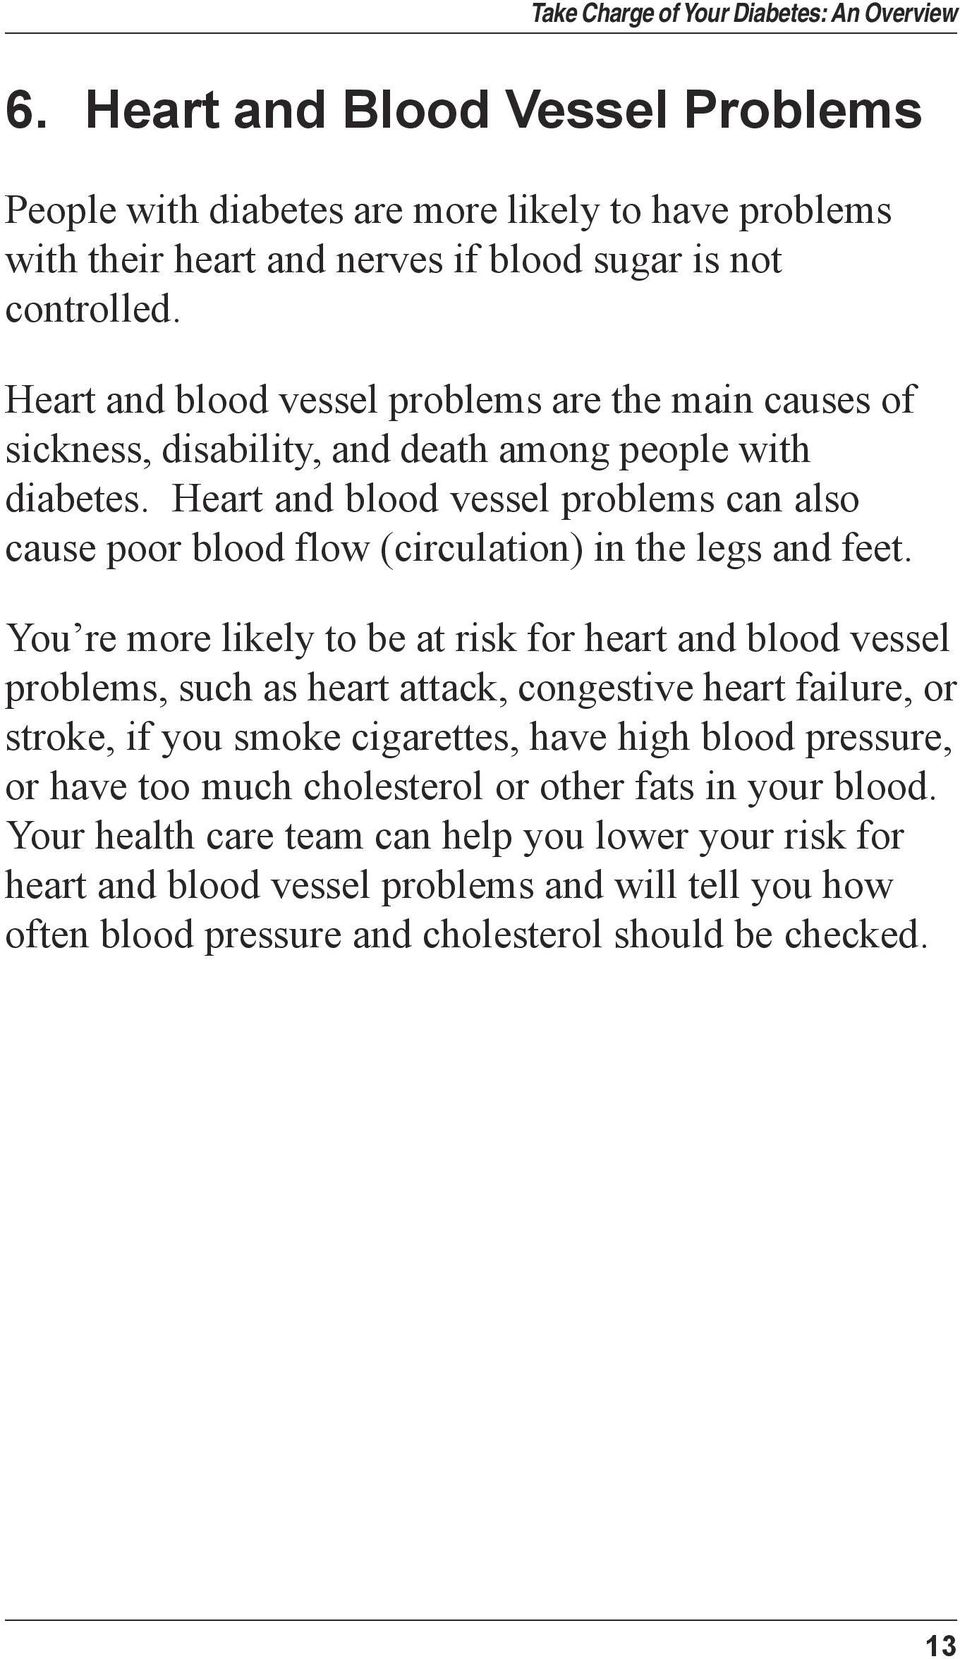 Heart and blood vessel problems can also cause poor blood flow (circulation) in the legs and feet.